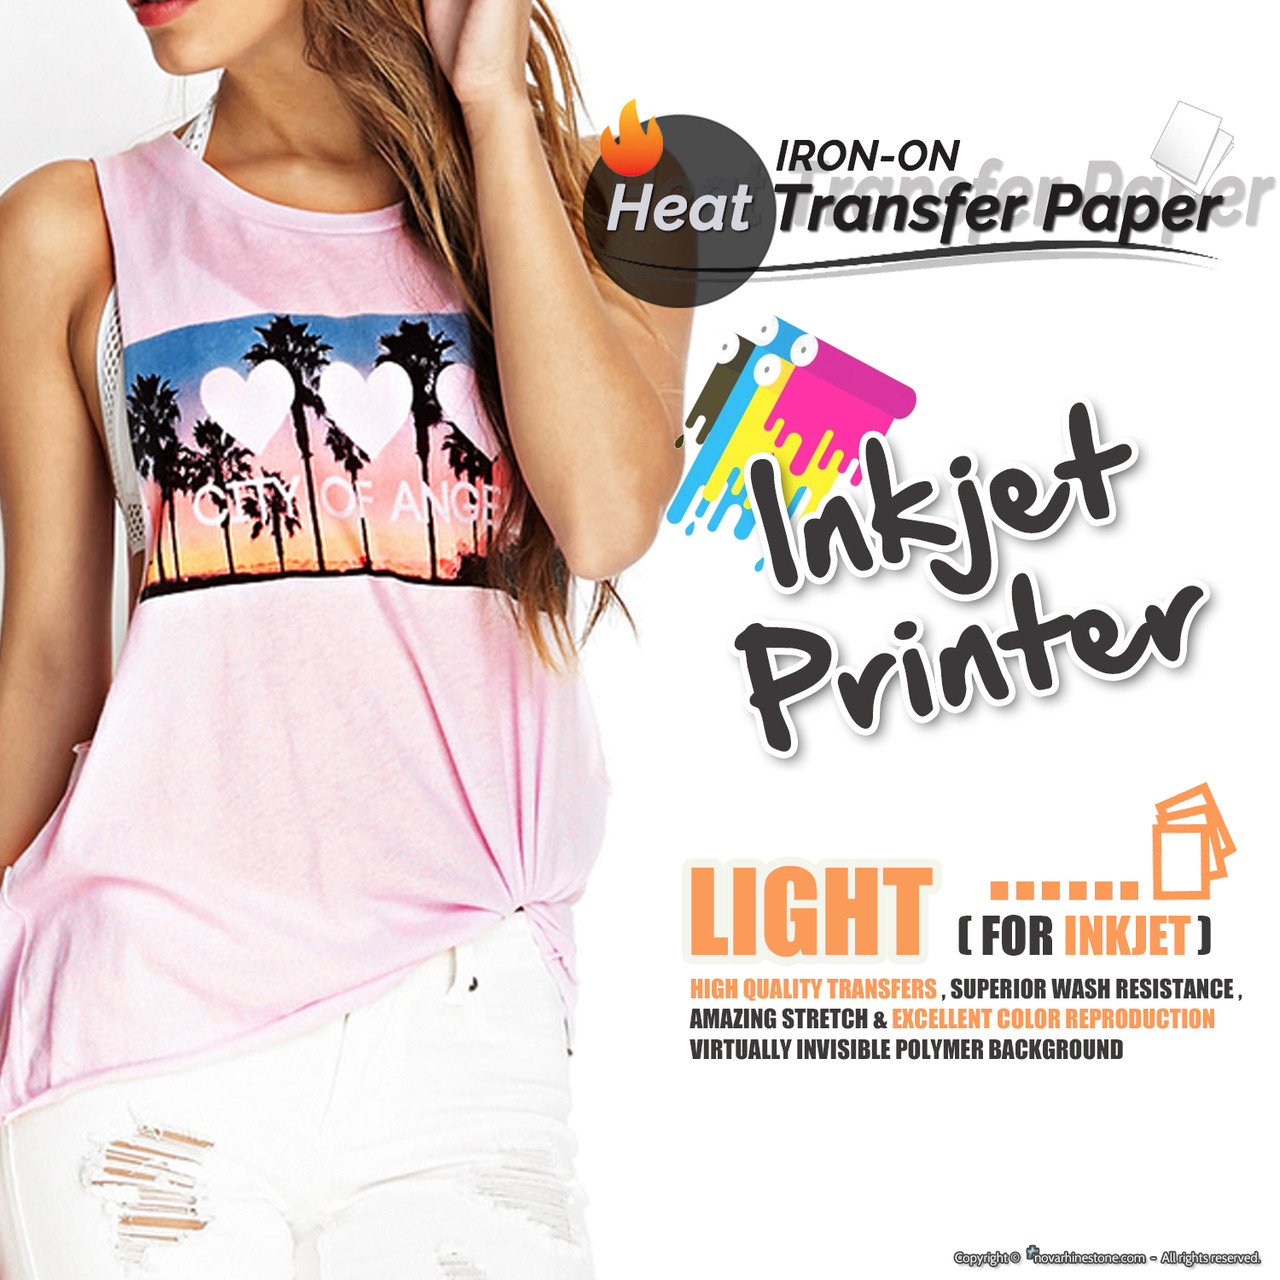 Stretchy Transfer Paper for Light Colors 8.5x11 50 Sheets 